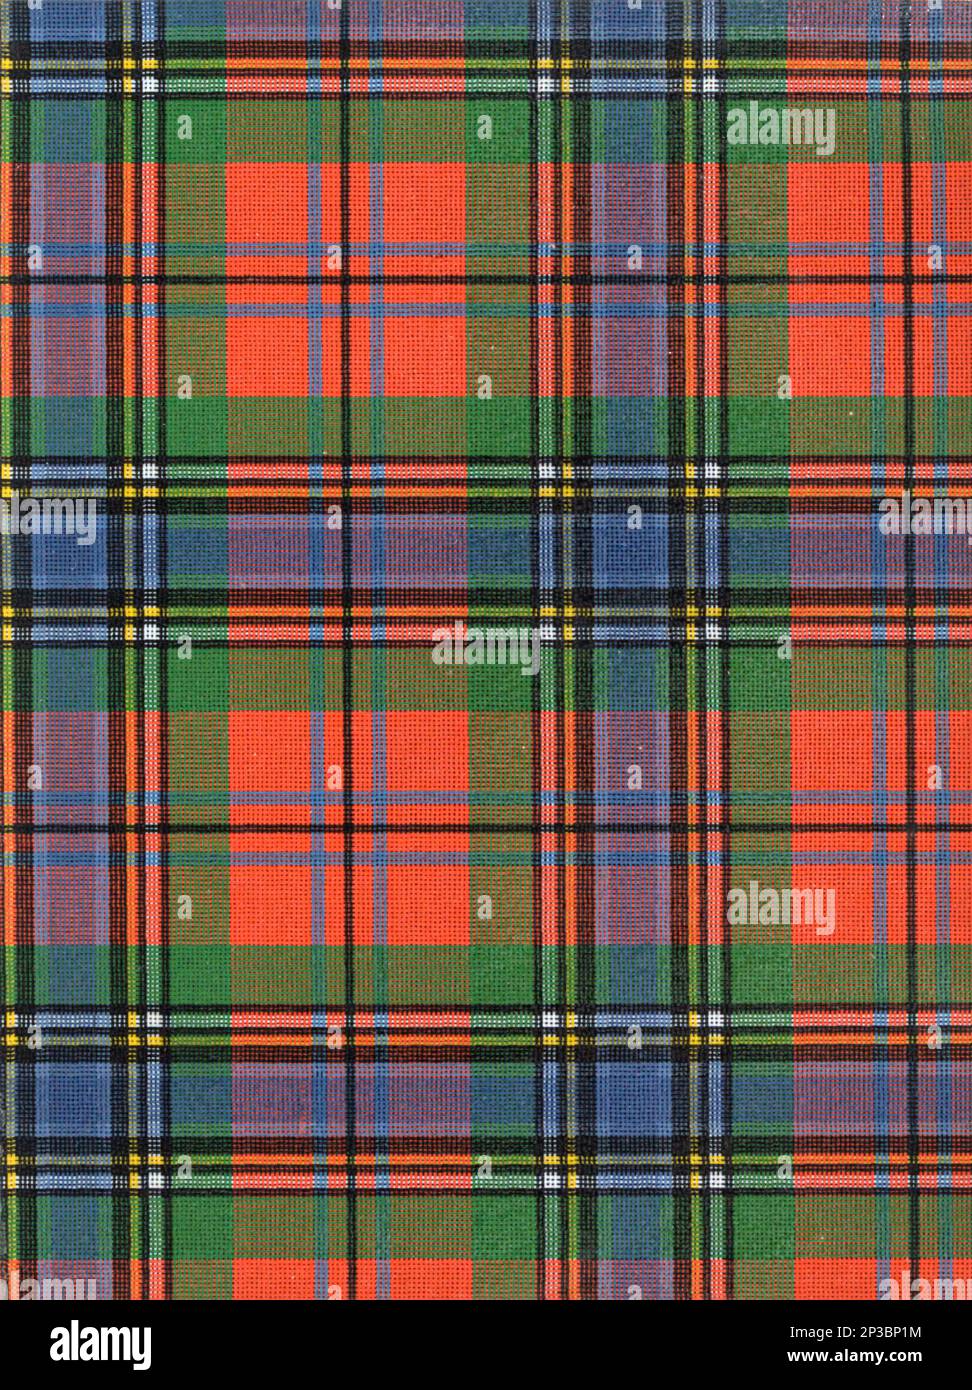 MacLean Clan Tartan in red and greenfrom the book ' A history of the Scottish Highlands, Highland clans and Highland regiments ' Volume 1 by Maclauchlan, Thomas, 1816-1886; Wilson, John, 1785-1854; Keltie, John Scott, Sir, 1840-1927 Publication date 1875 publisher Edinburgh ; London : A. Fullarton Stock Photo